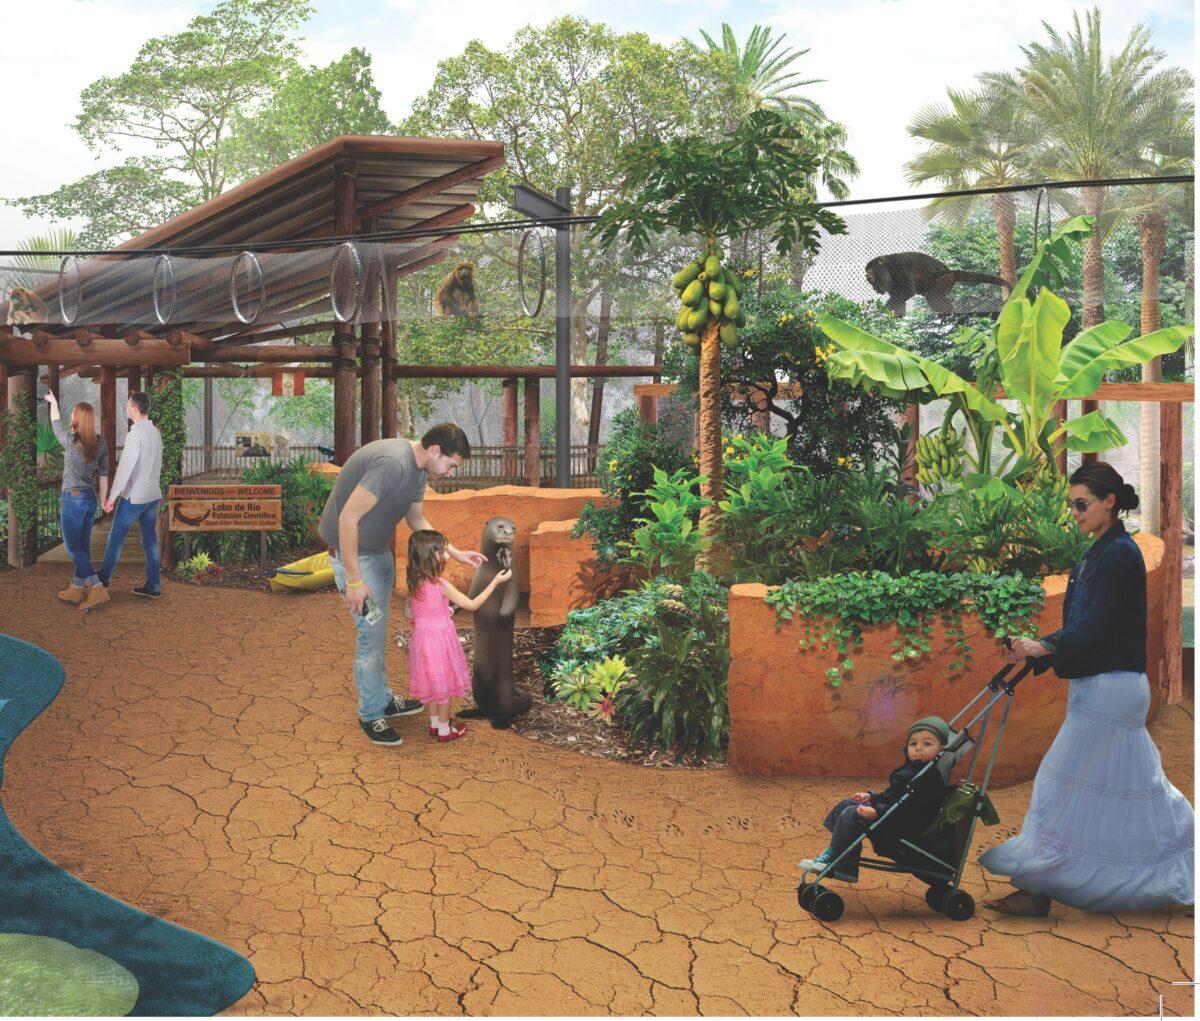 Rendering of a portion of the new Santa Ana Zoo expansion. (Courtesy of the City of Santa Ana)